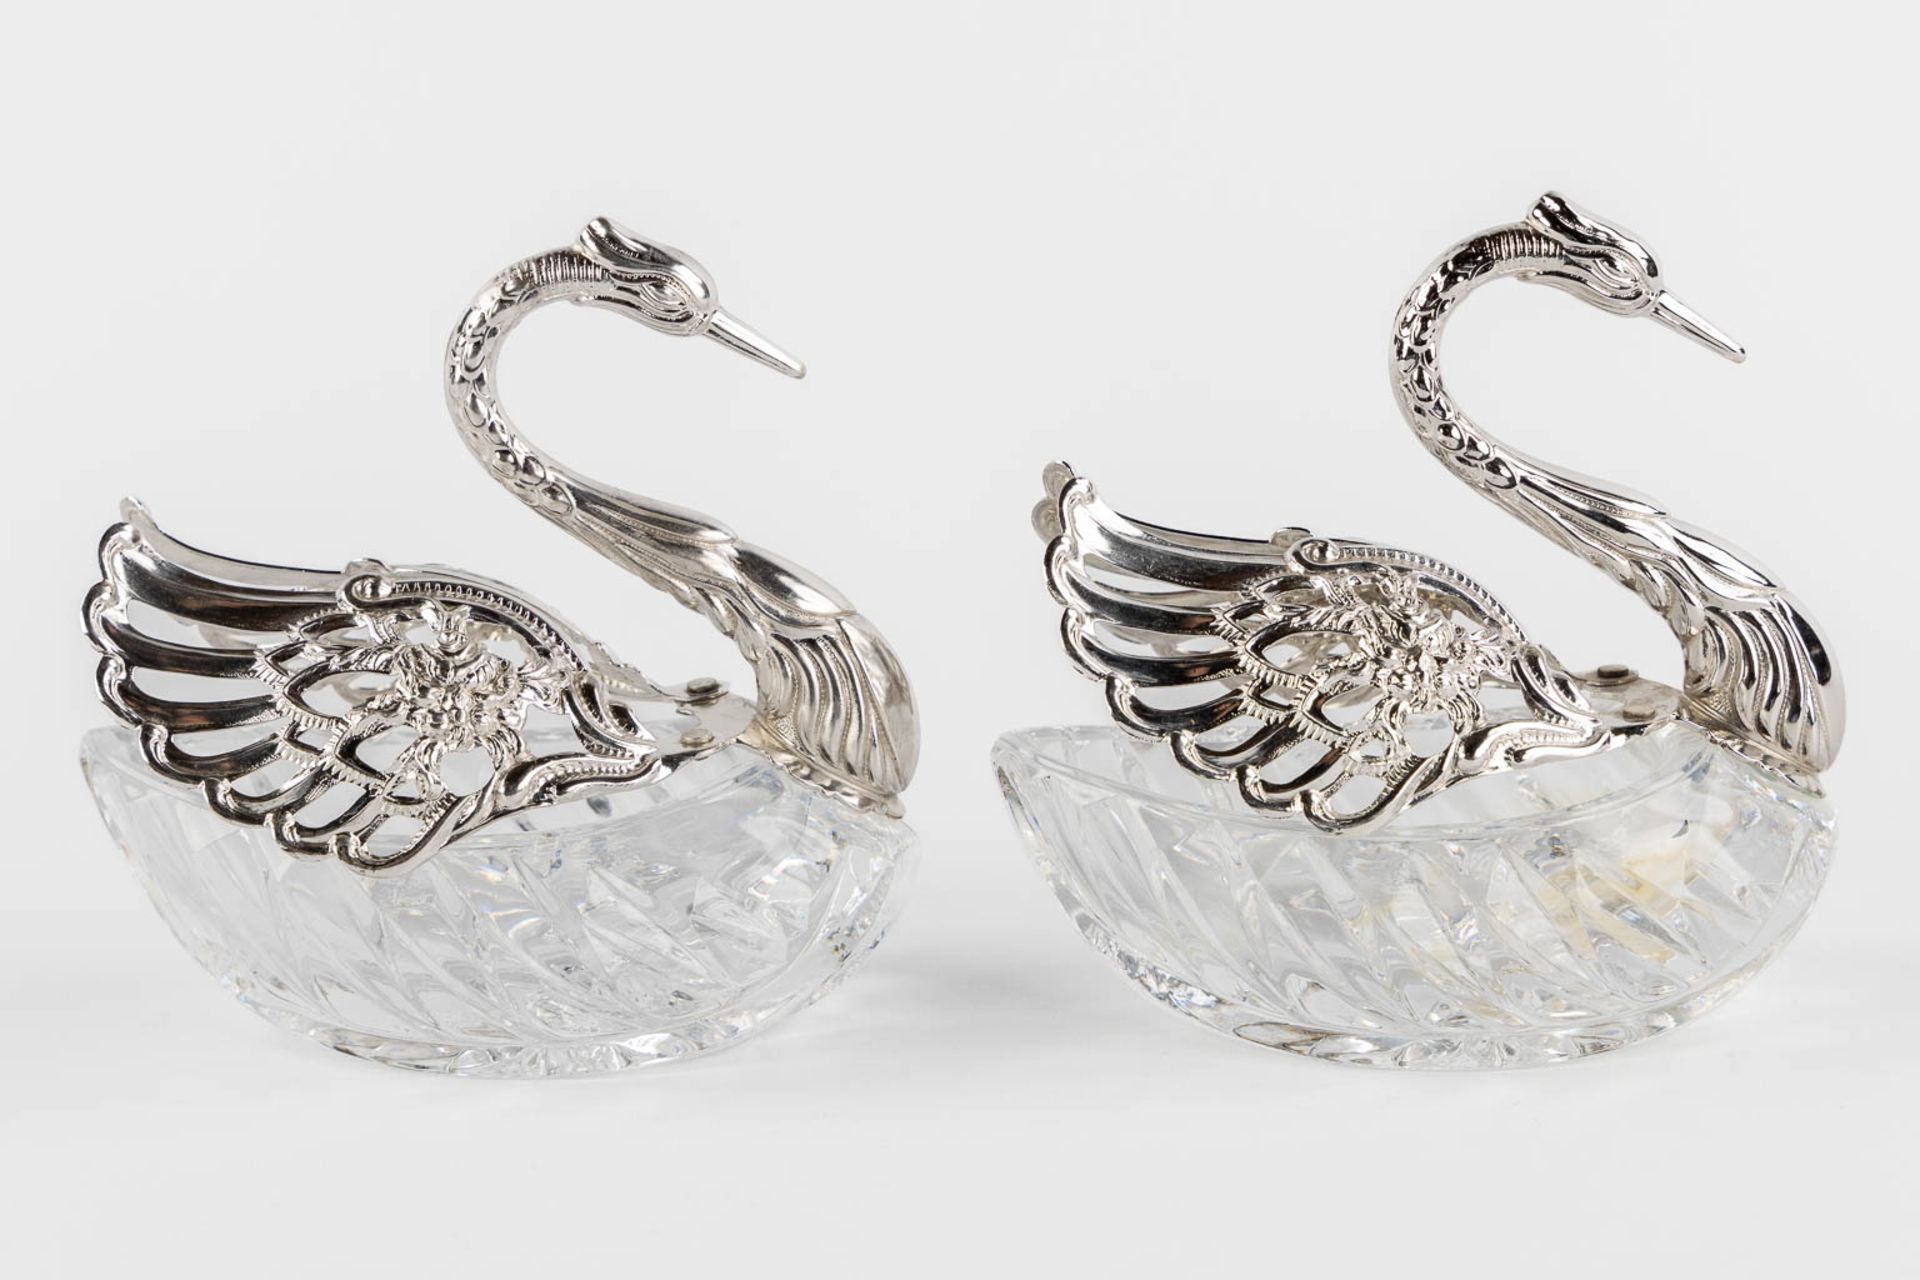 A large collection of silver and silver-plated objects, table accessories and serving ware. (L:16 x  - Bild 26 aus 29